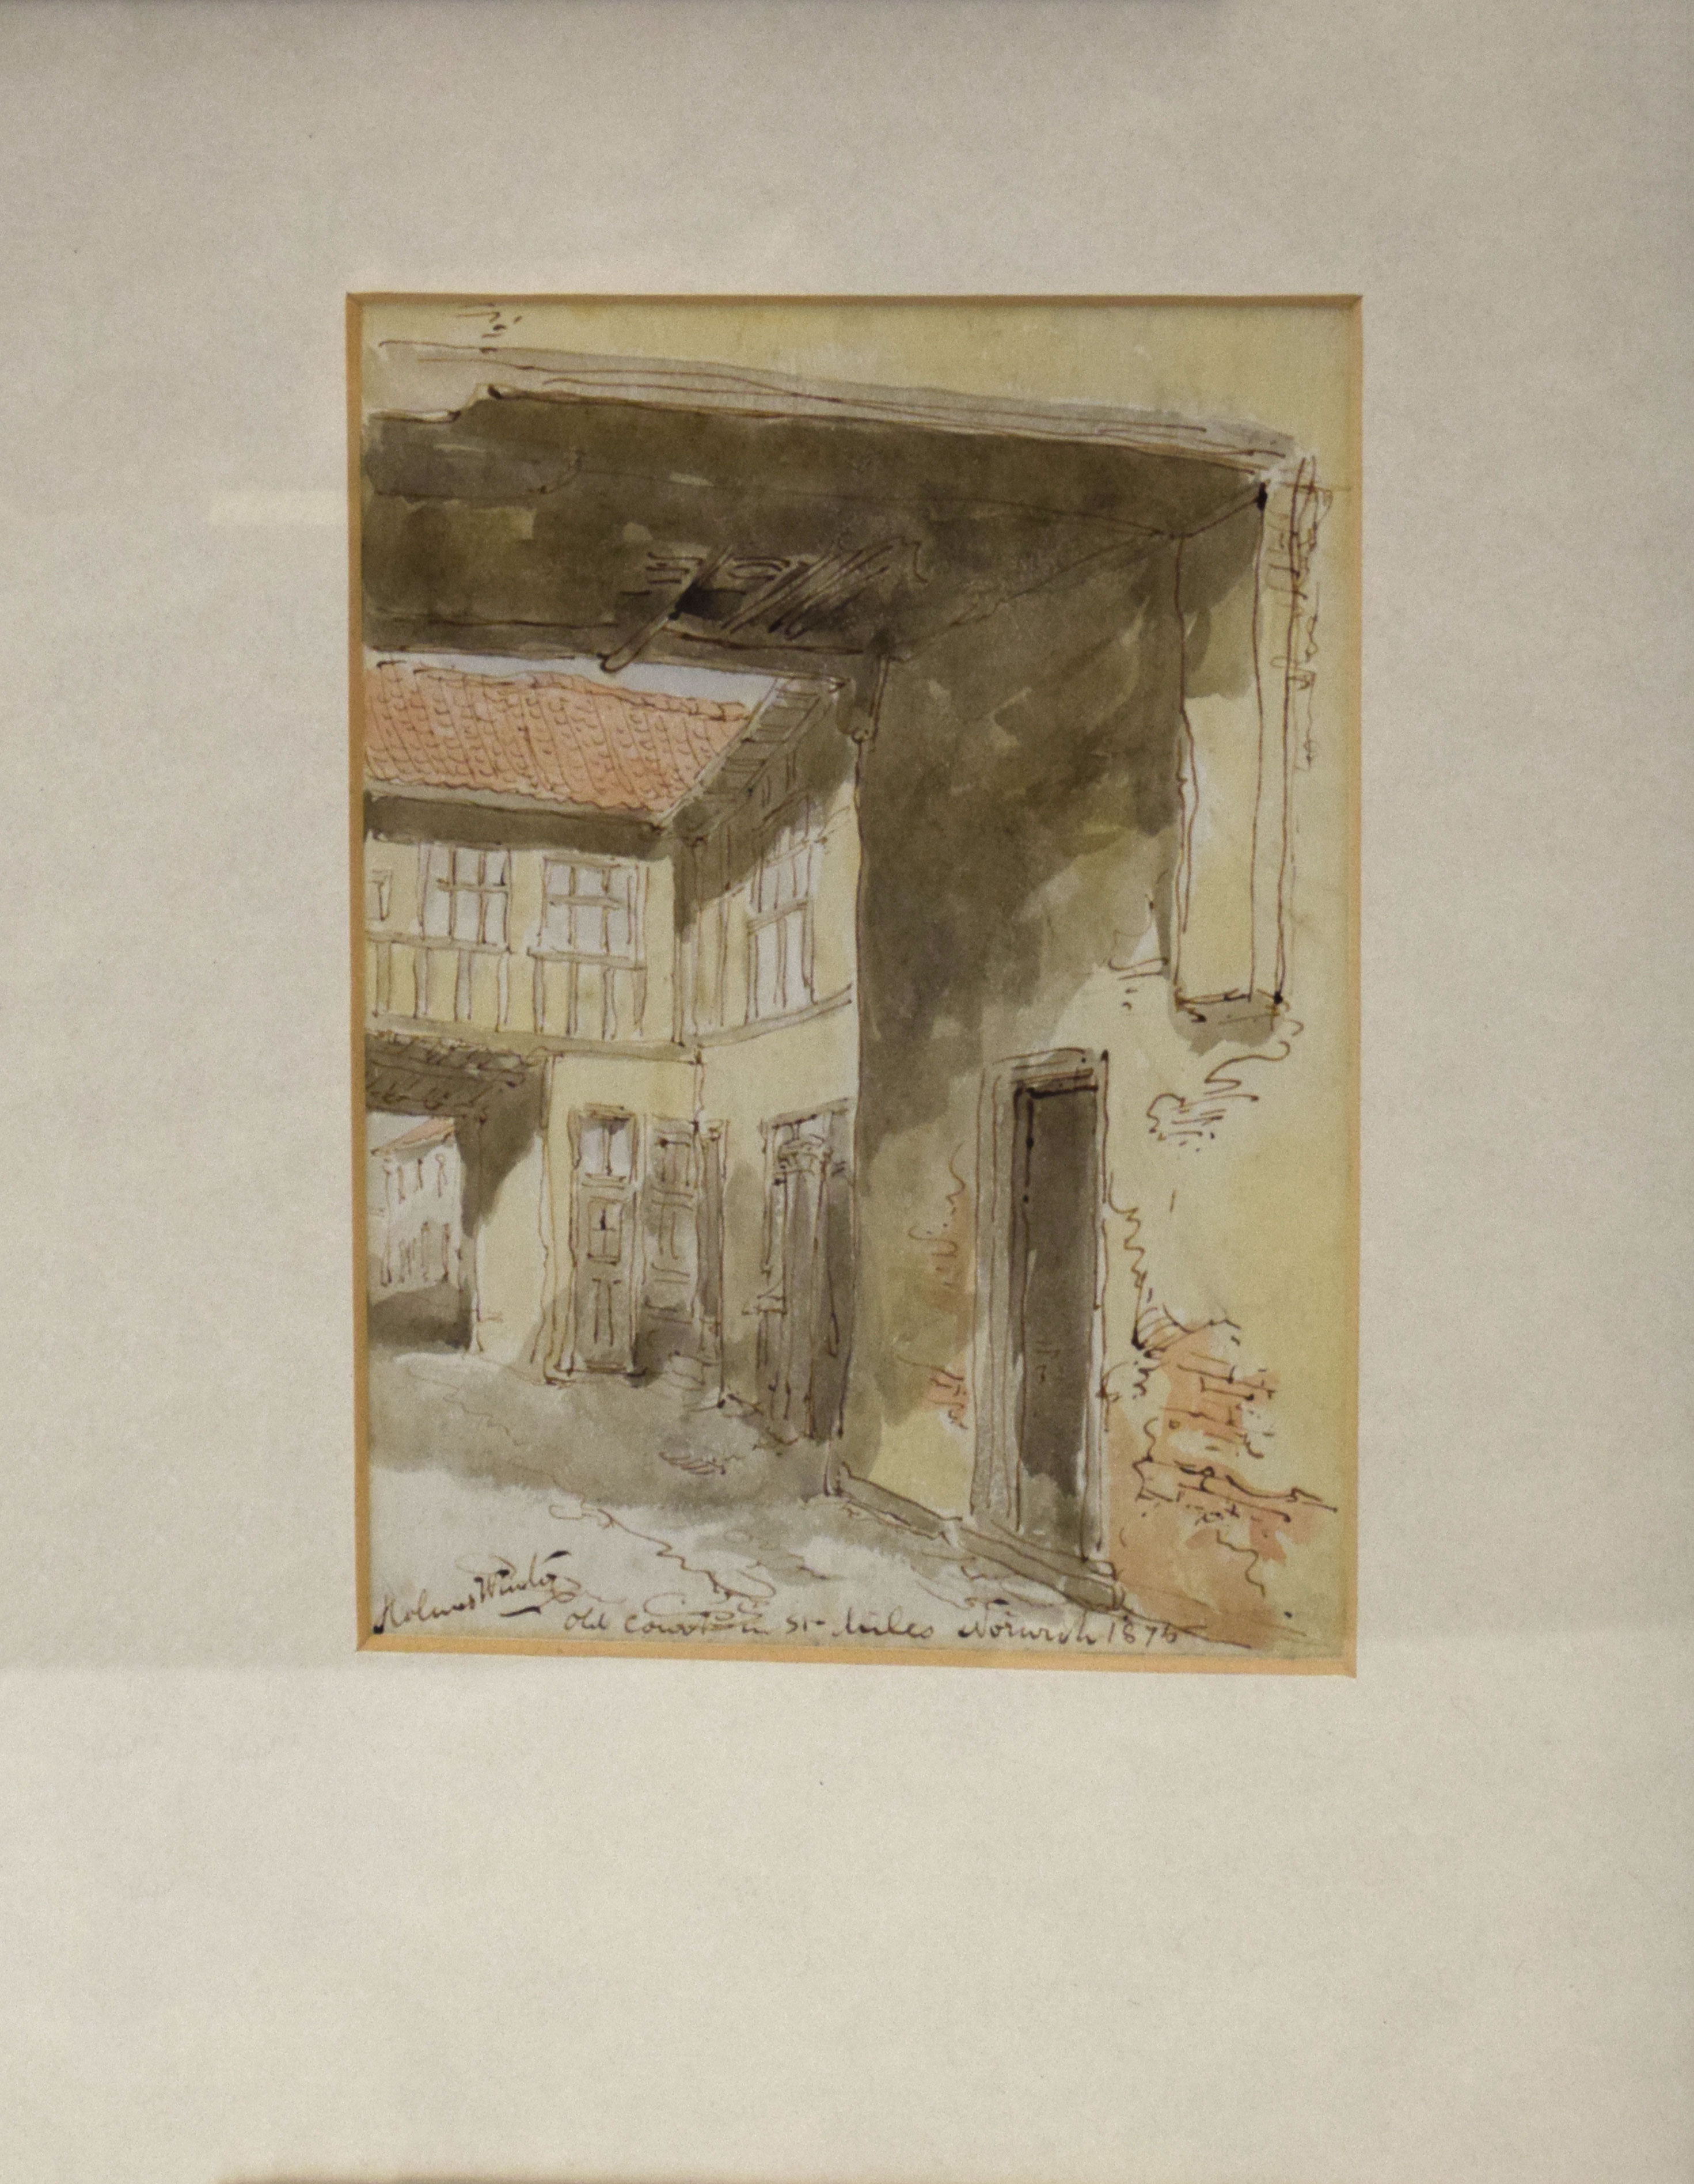 Holmes Winter, "Old Court in St Lukes, Norwich, 1875", pen, ink and watercolour, signed and